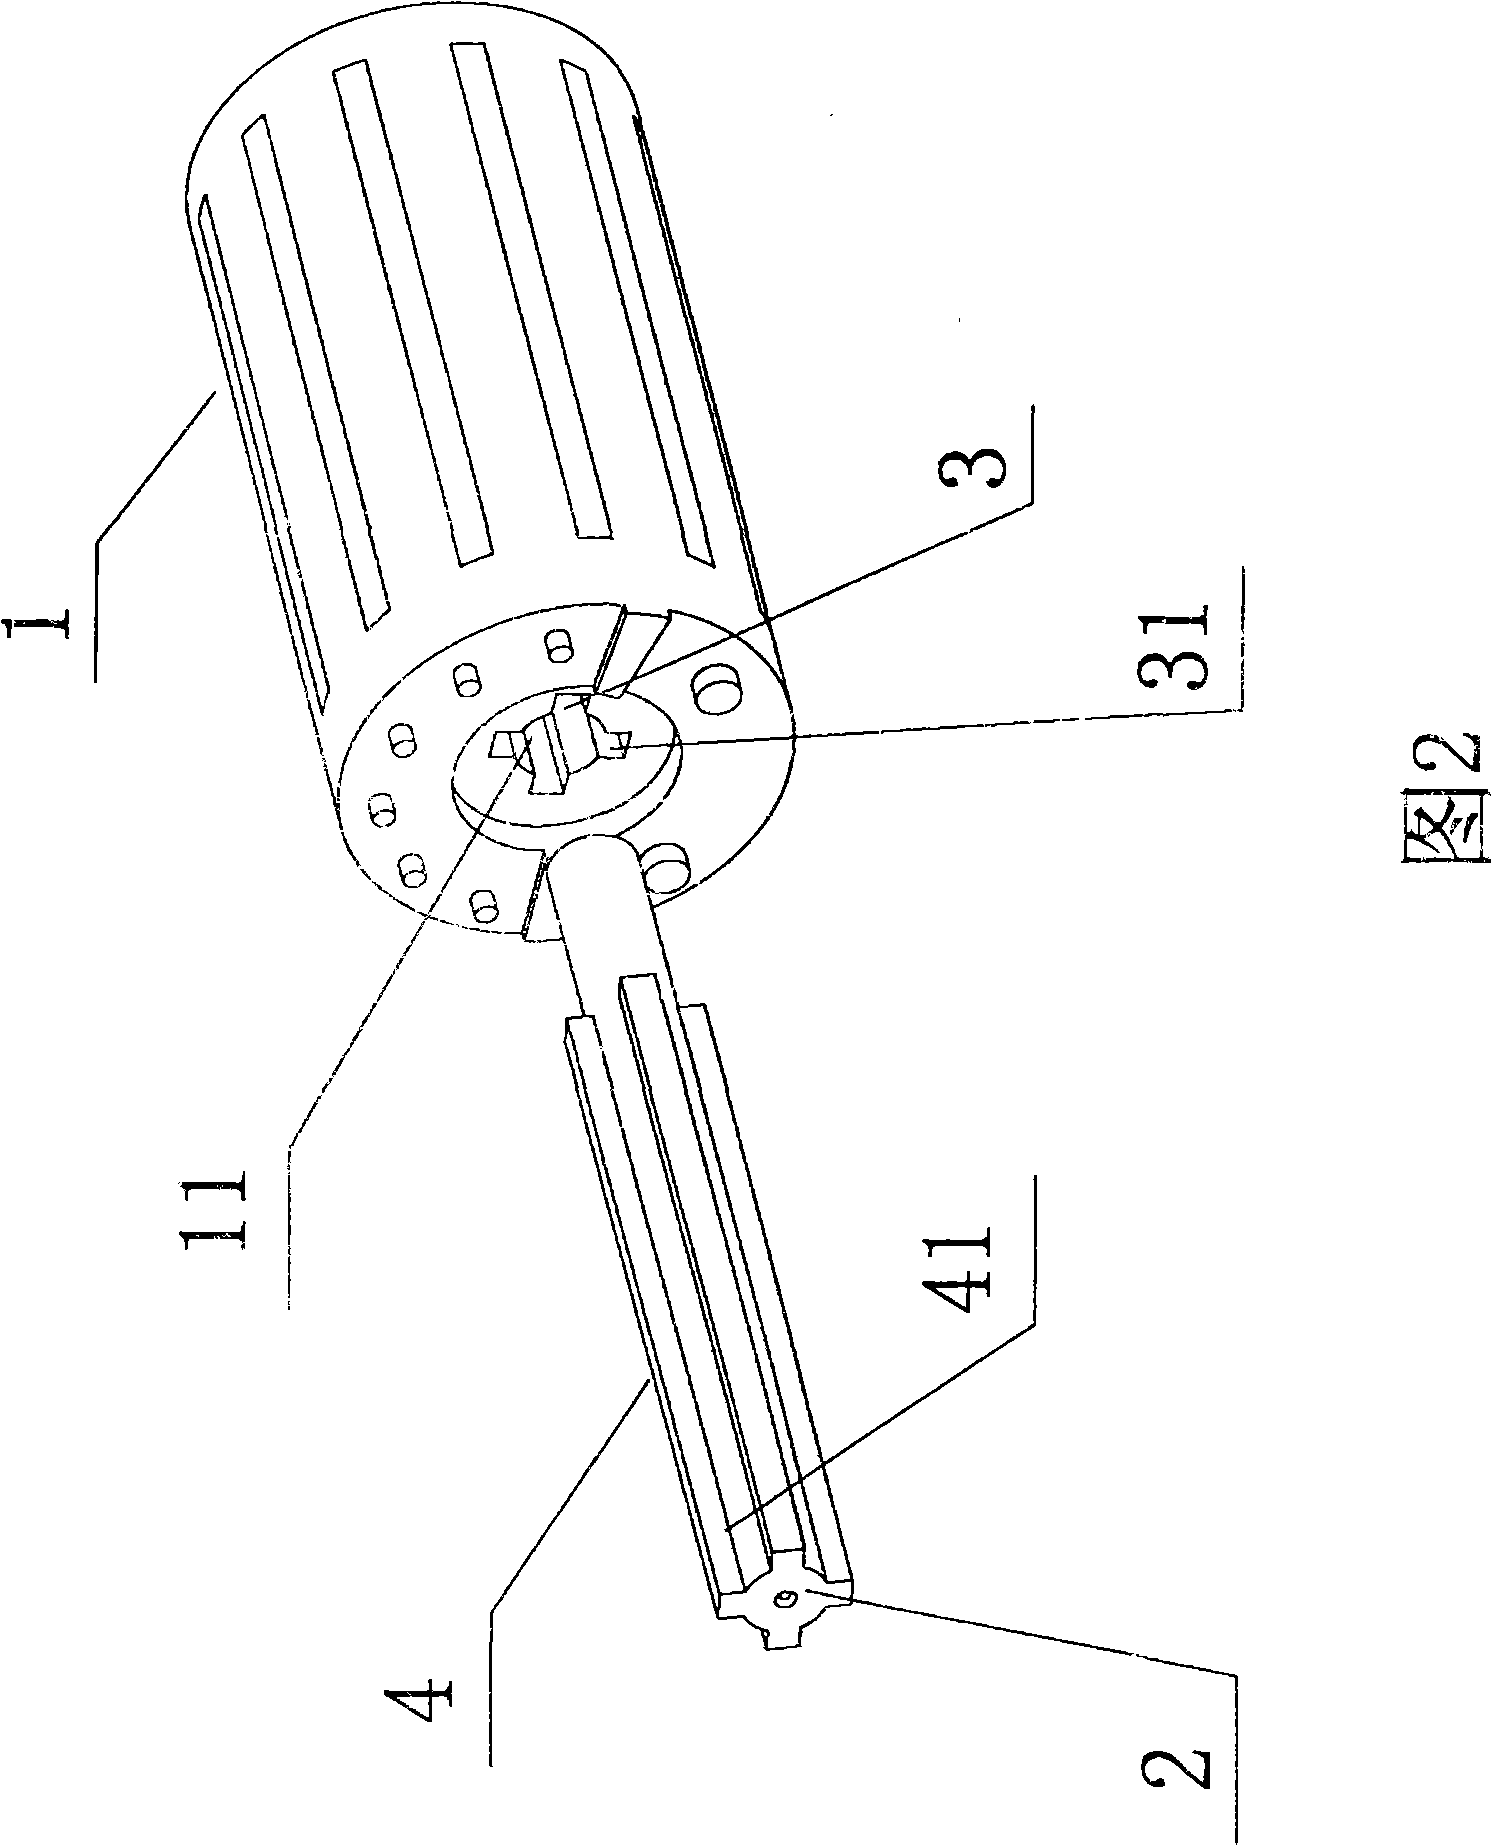 Assembling structure of crankshaft and rotor